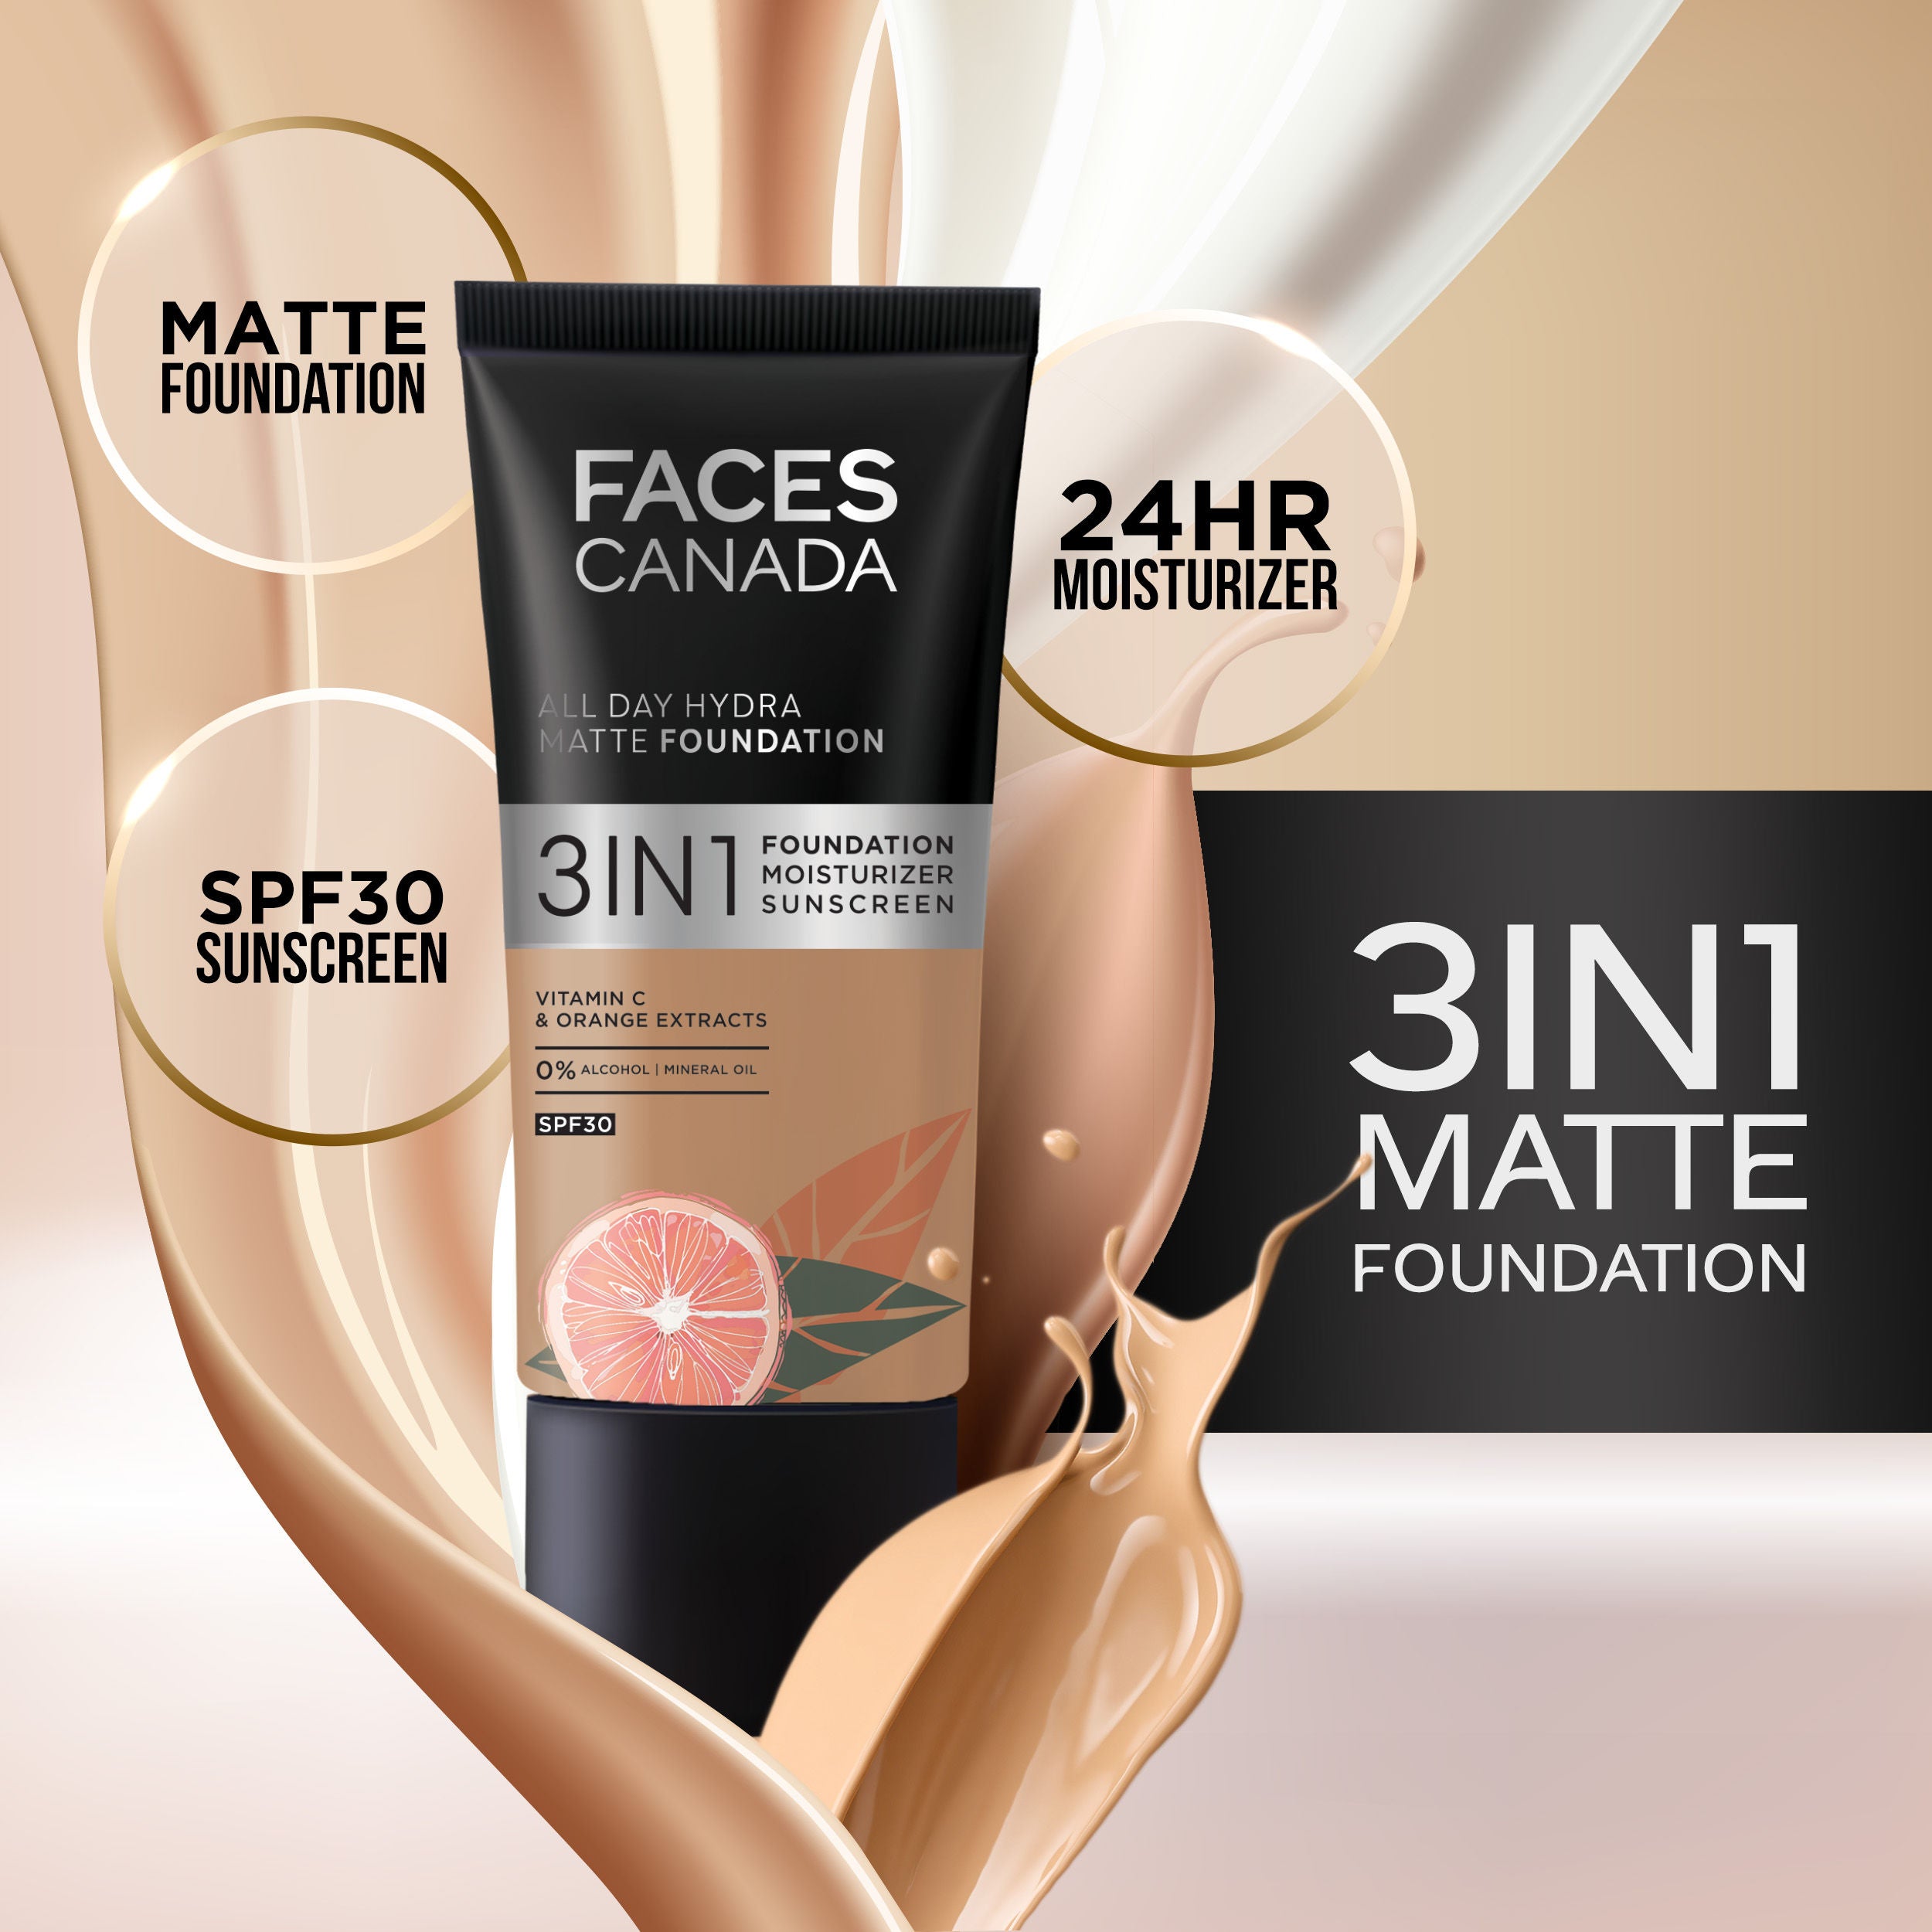 Faces Canada 3 In 1 All Day Hydra Matte Foundation - Medium Natural 022 (25ml) Faces Canada